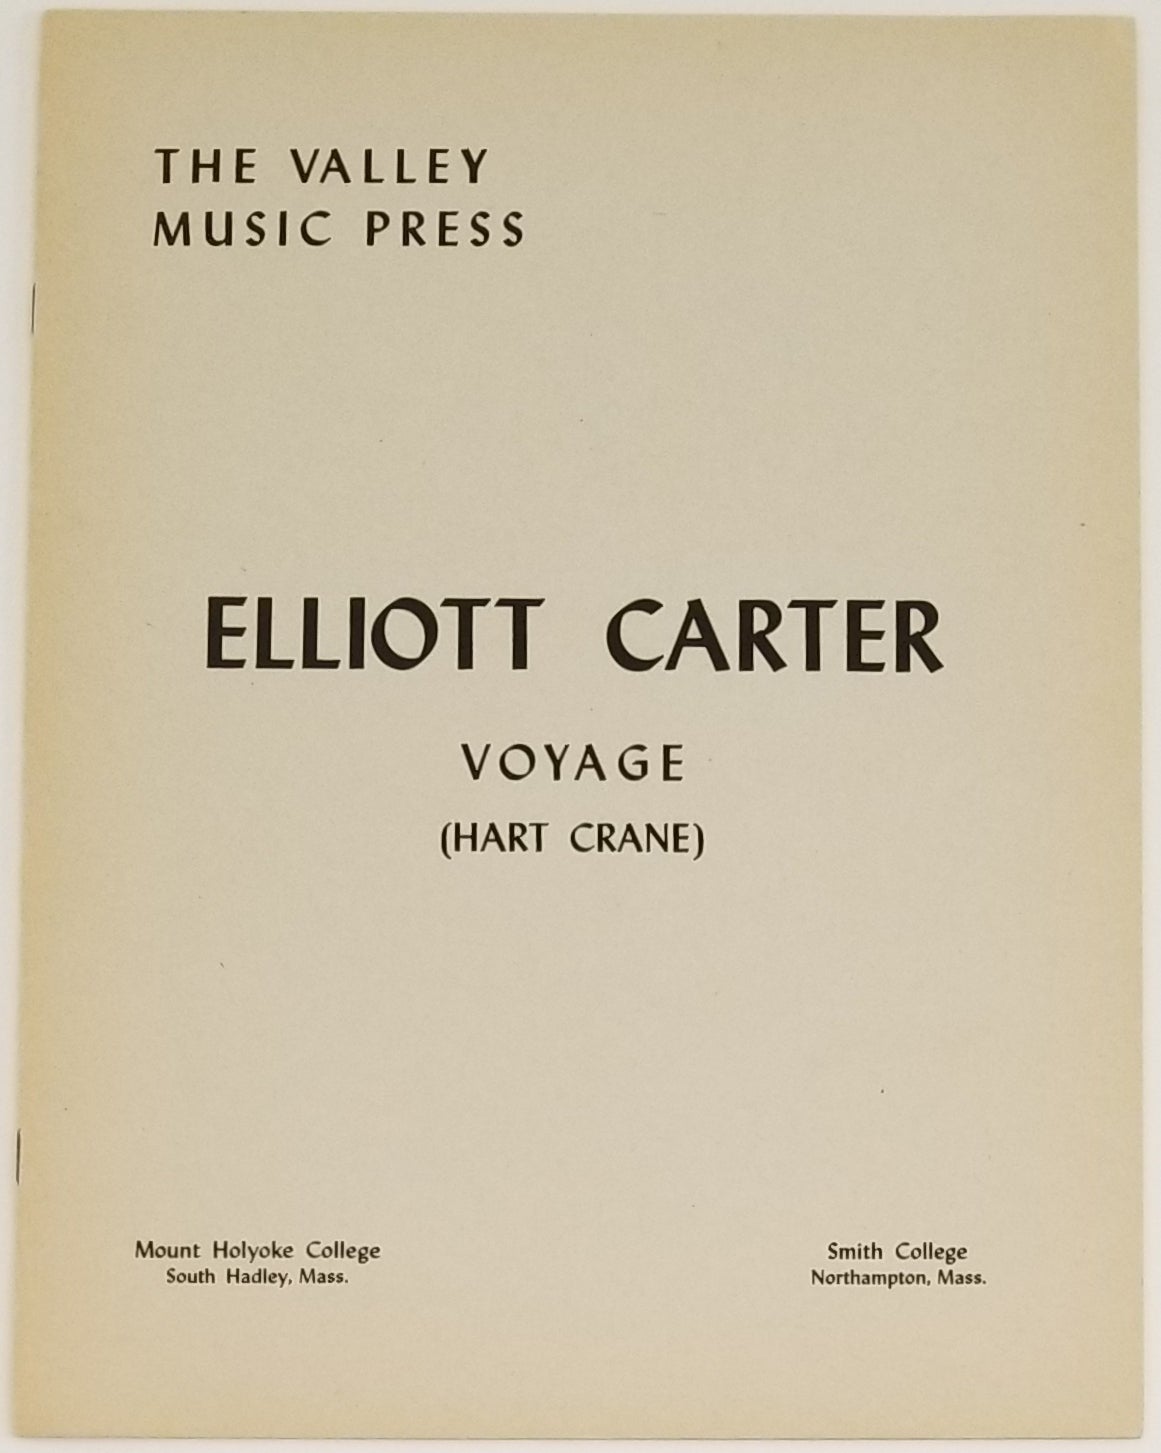 [Book #26932] VOYAGE. A Poem. With a Commentary on the Poem by the Composer. Hart Crane, Elliott Carter.